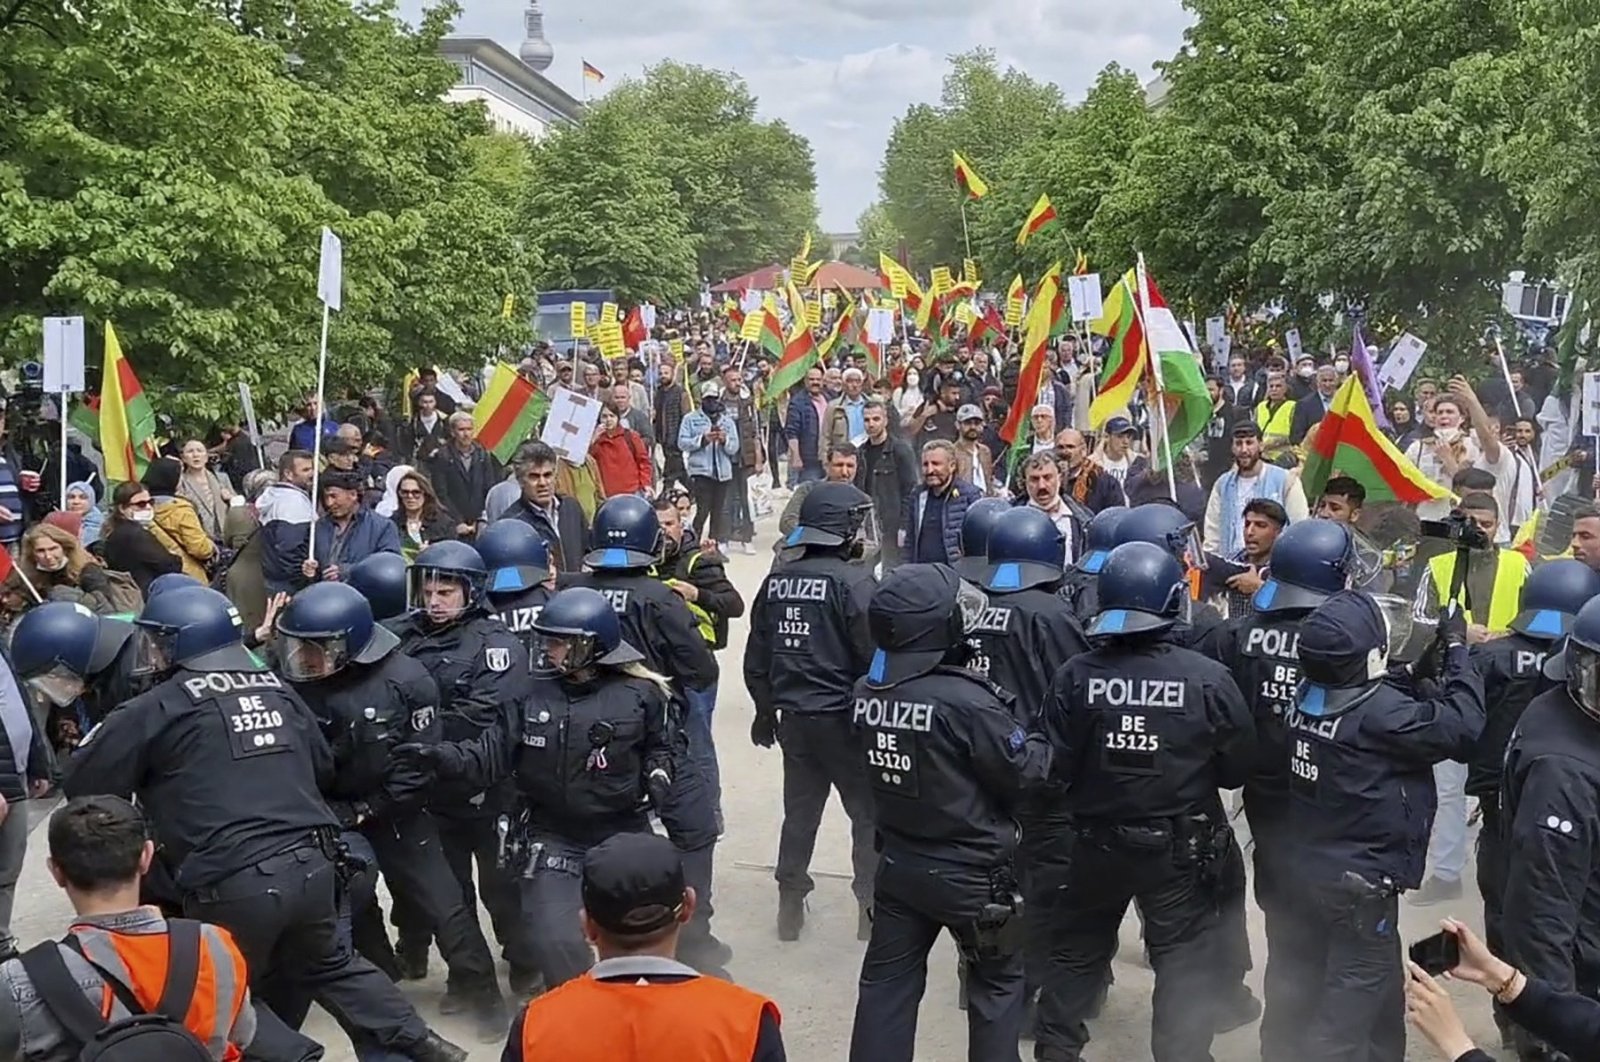 PKK supporters demonstrate against Turkish policy and briefly clash with police in Berlin, Germany, Saturday, May 14, 2022. (AP)